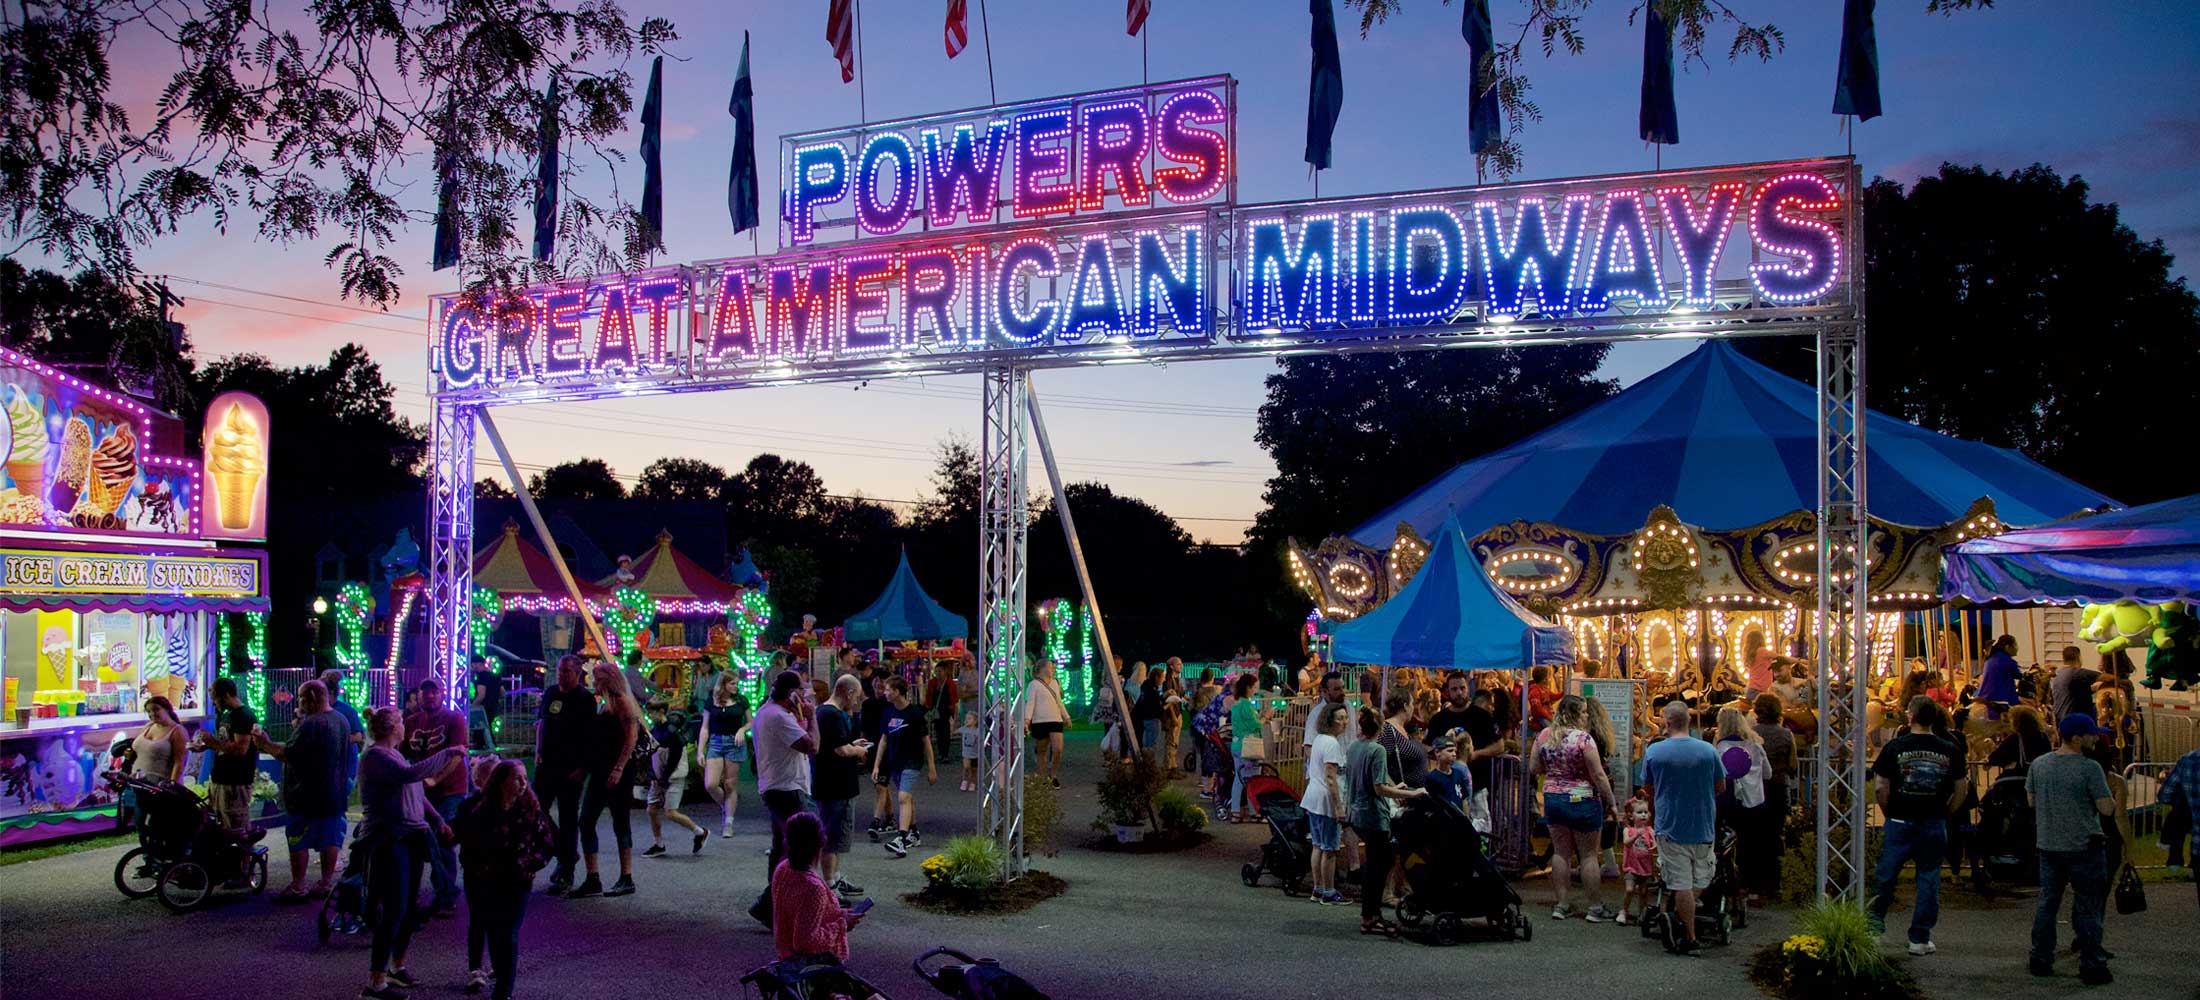 Powers Great American Midways